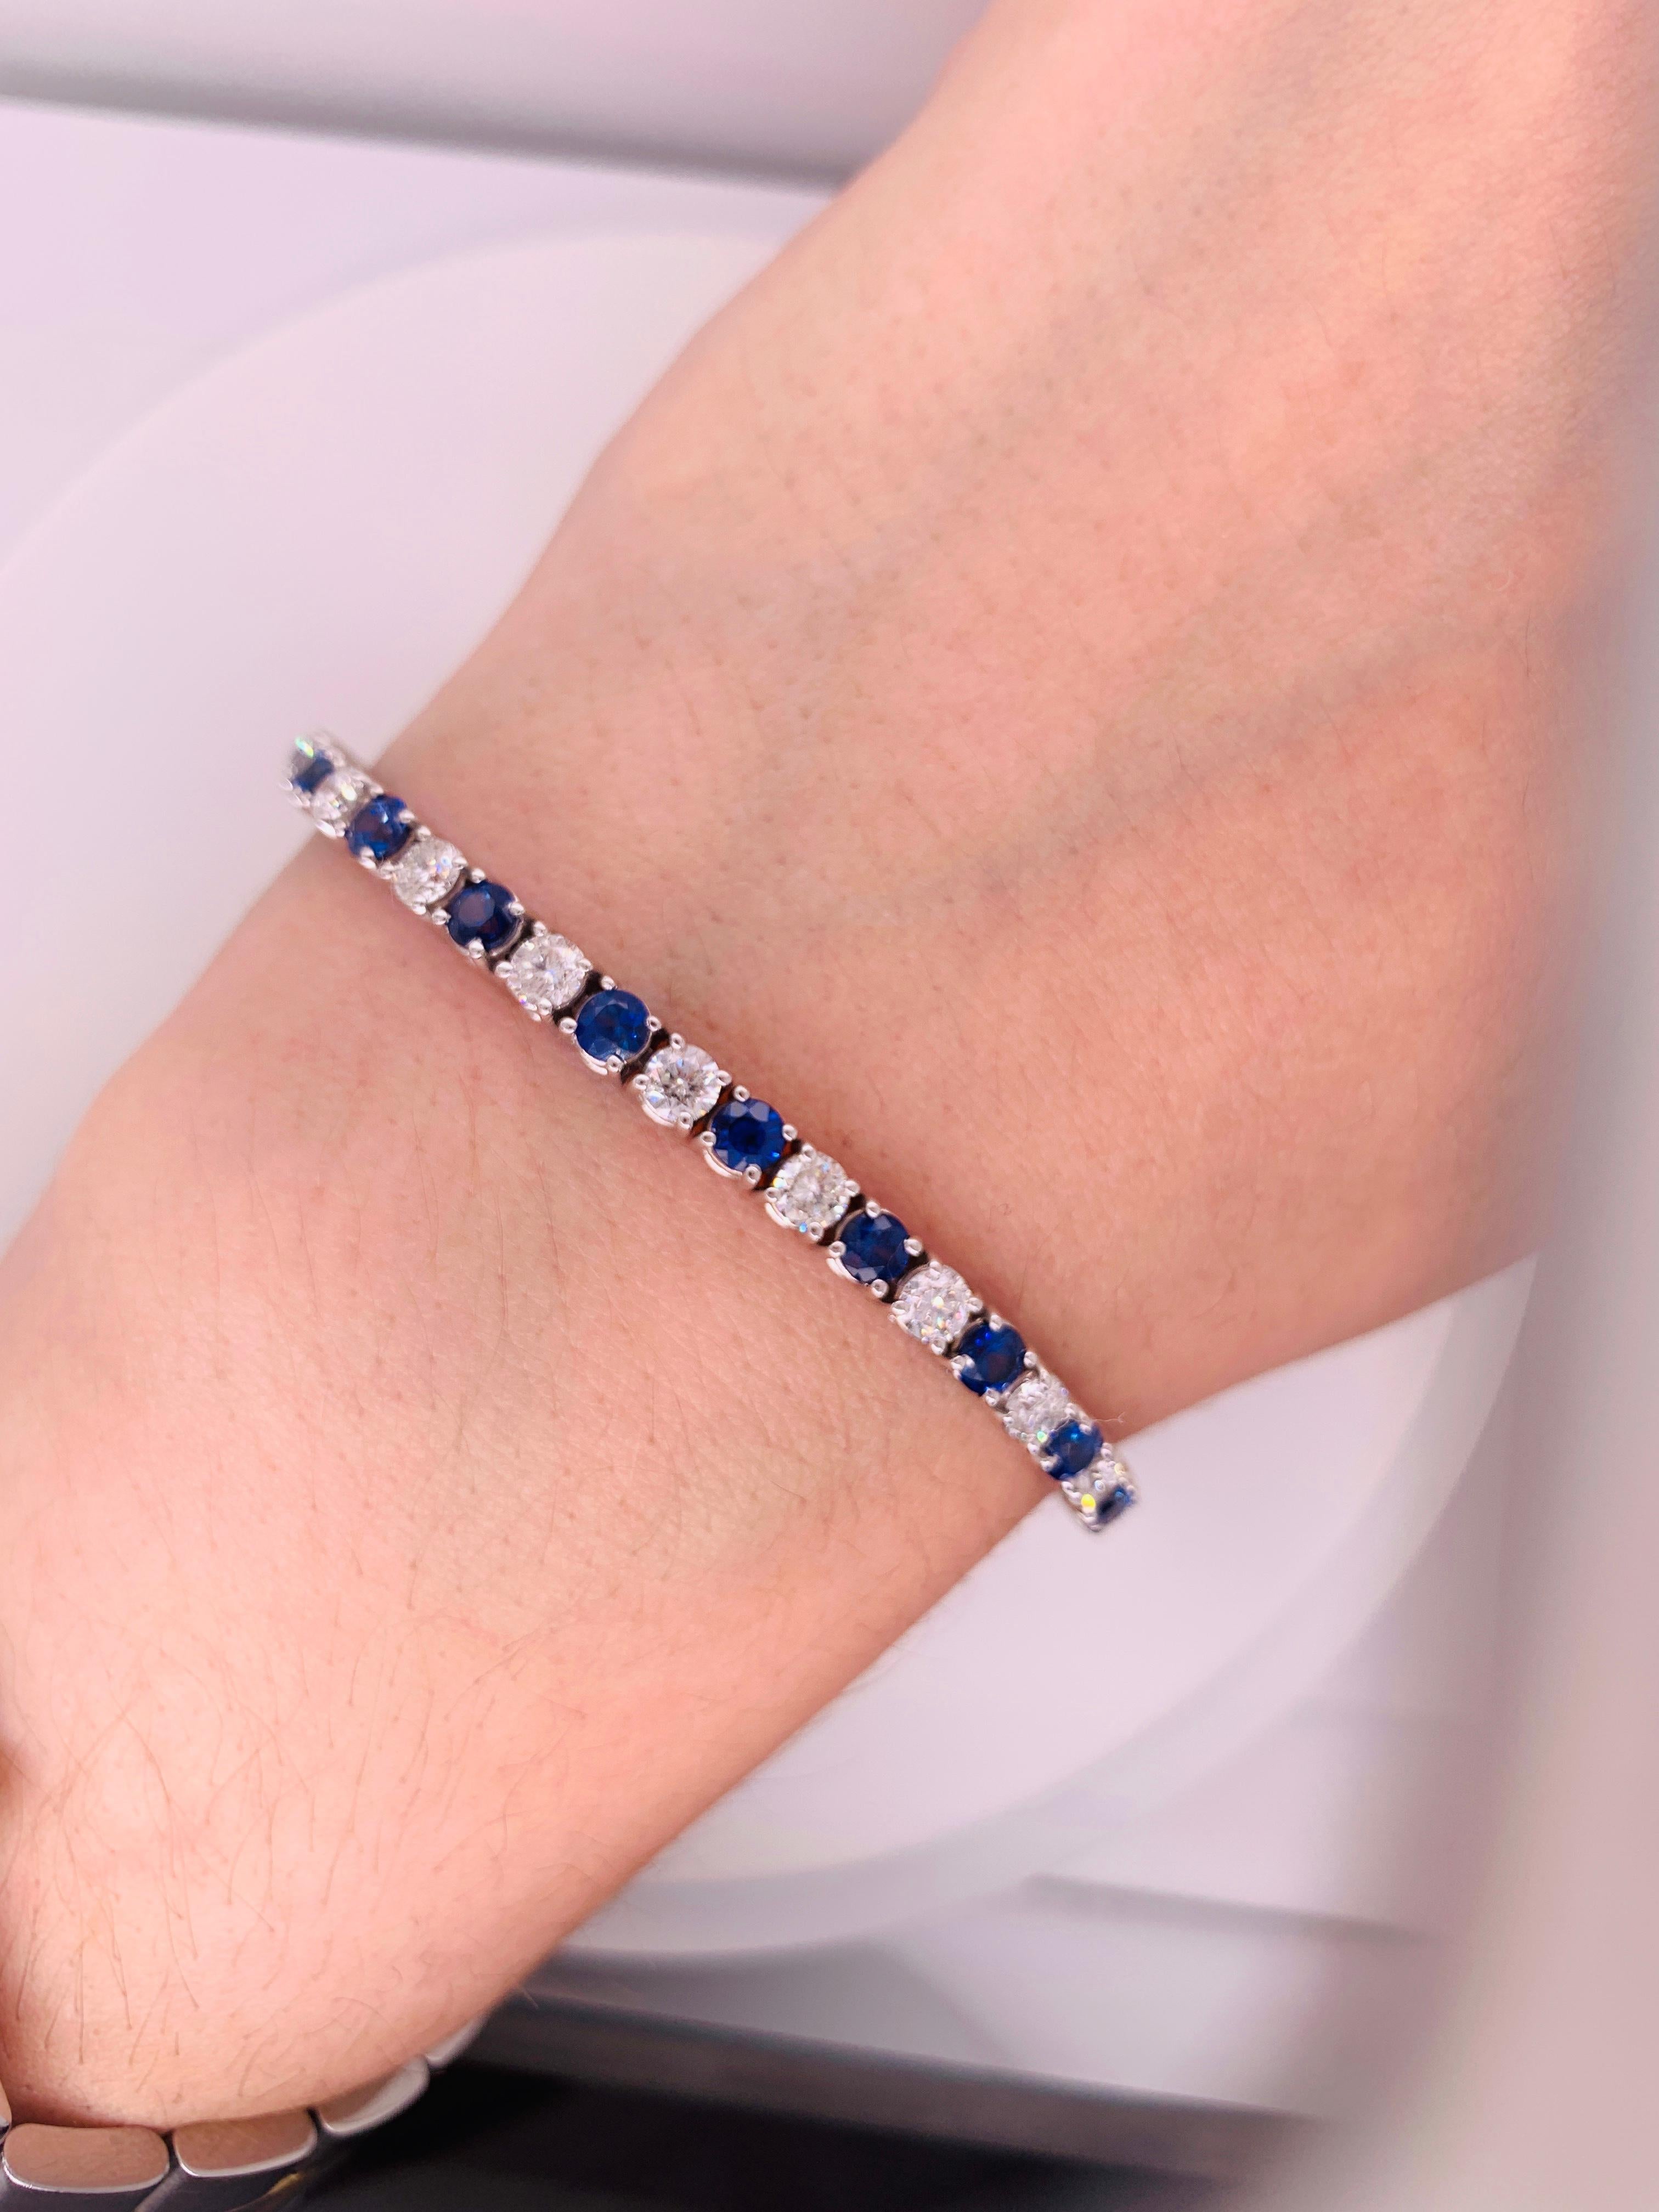 This Tennis Bracelet features 19 Stones of Round Deep Blue Sapphires in 7.36 Carats of Total Sapphires Weight and 19 Stones of Round White Diamonds in 4.15 Carats of Total Diamonds Weight. The Length of the Bracelet is 7 Inches, it has Bracelet